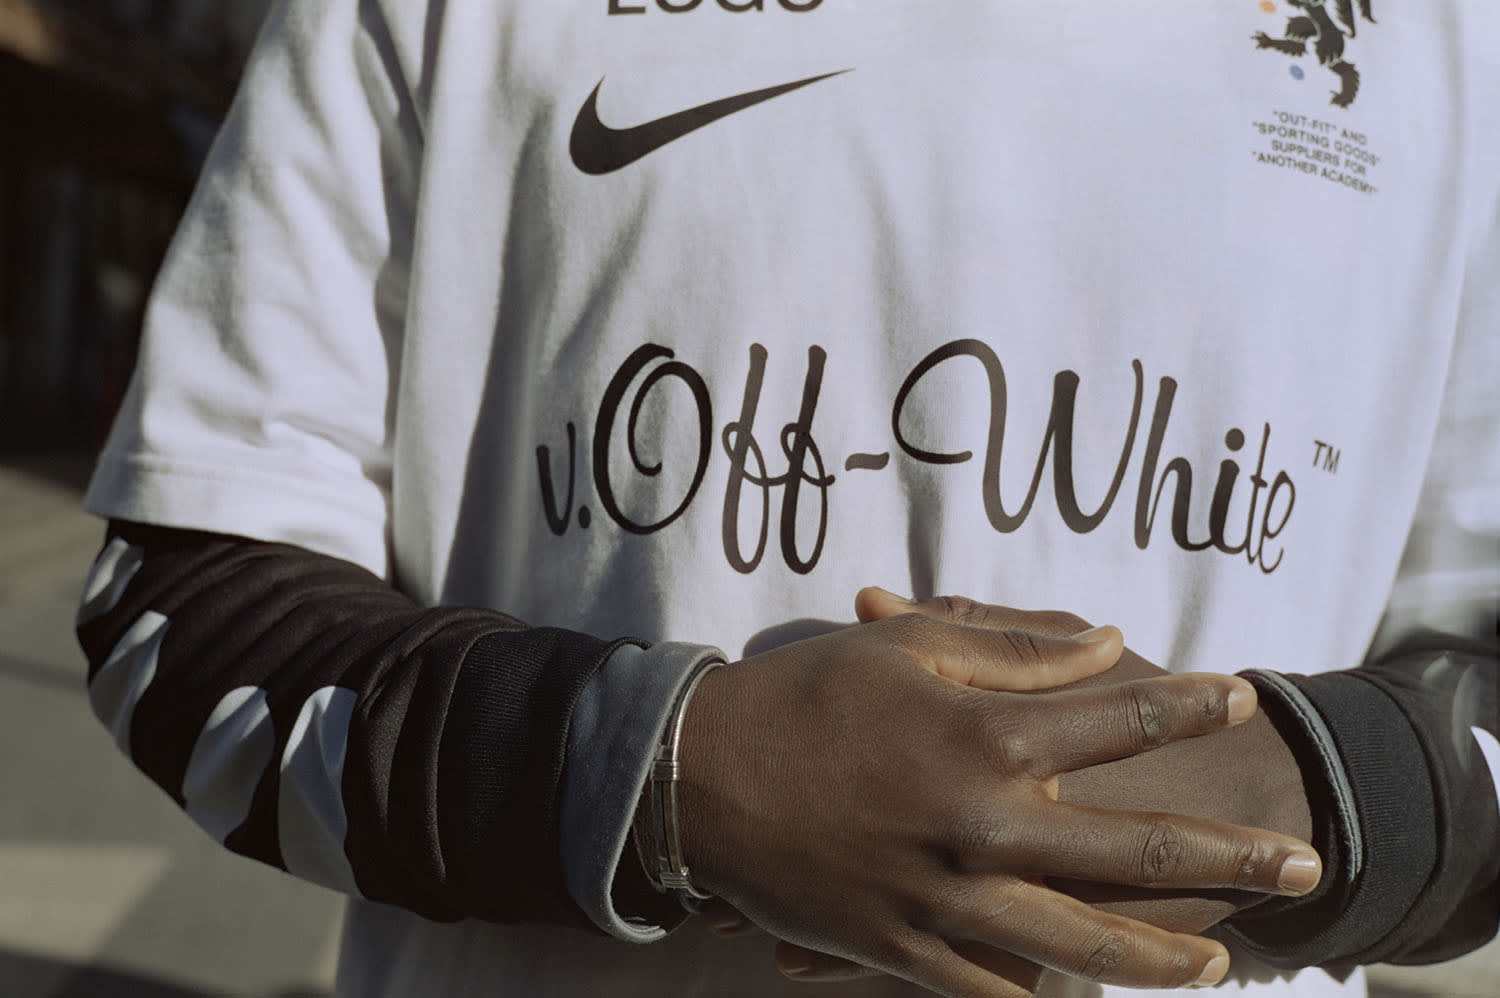 Off-White x Nike Football Mon Amour Collection (20)